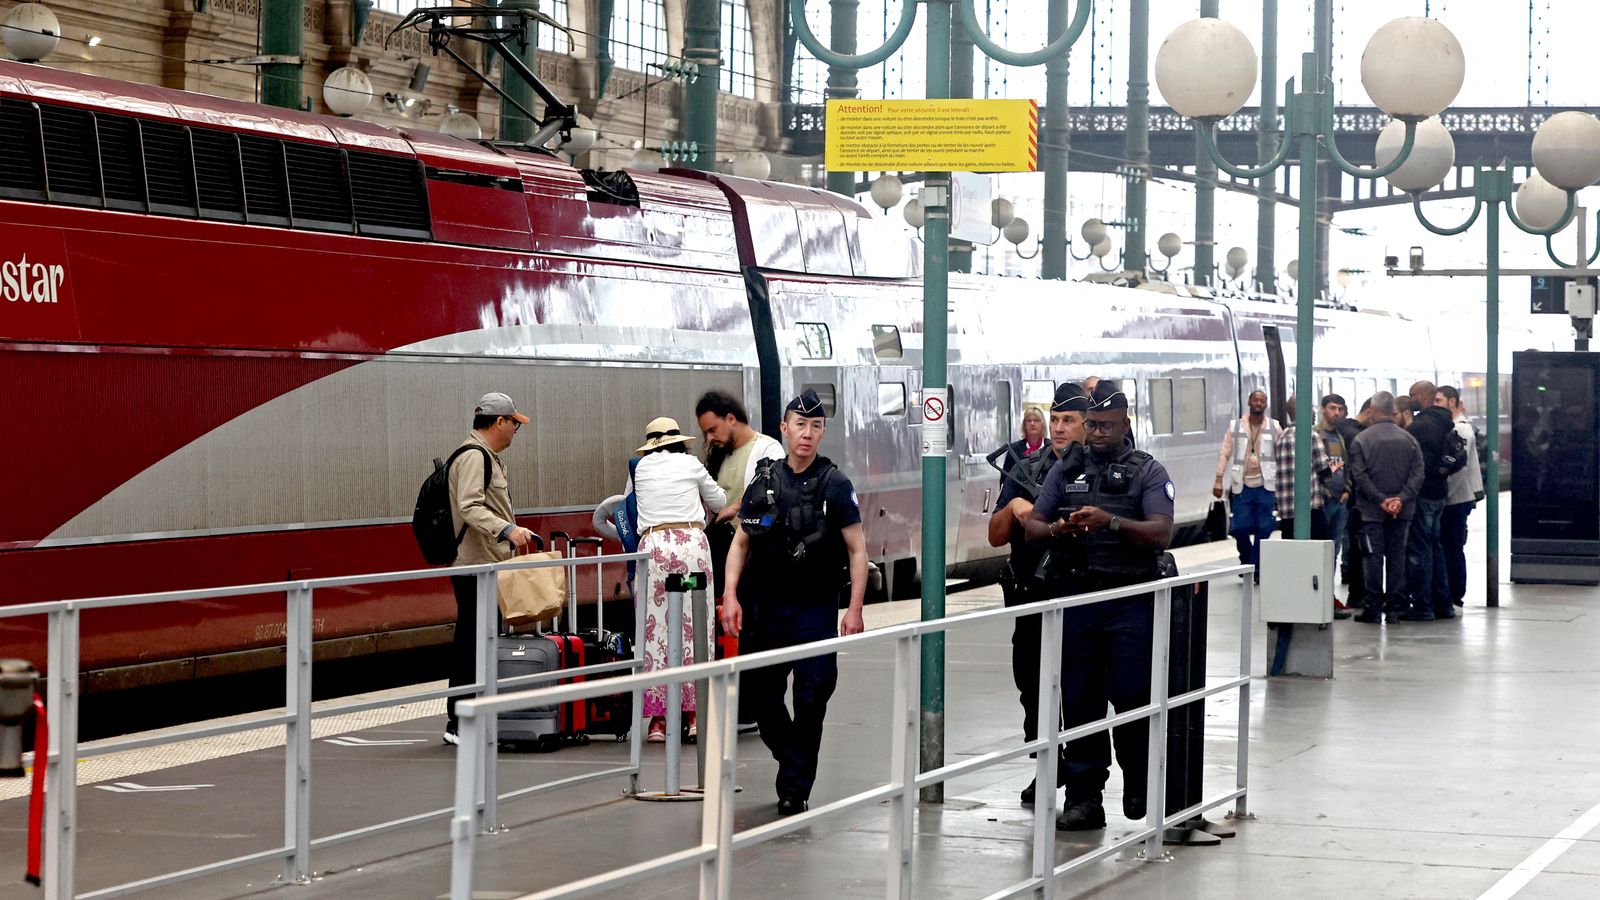 Olympic ‘sabotage’: Arsonists target Paris games with attacks on high-speed rail routes